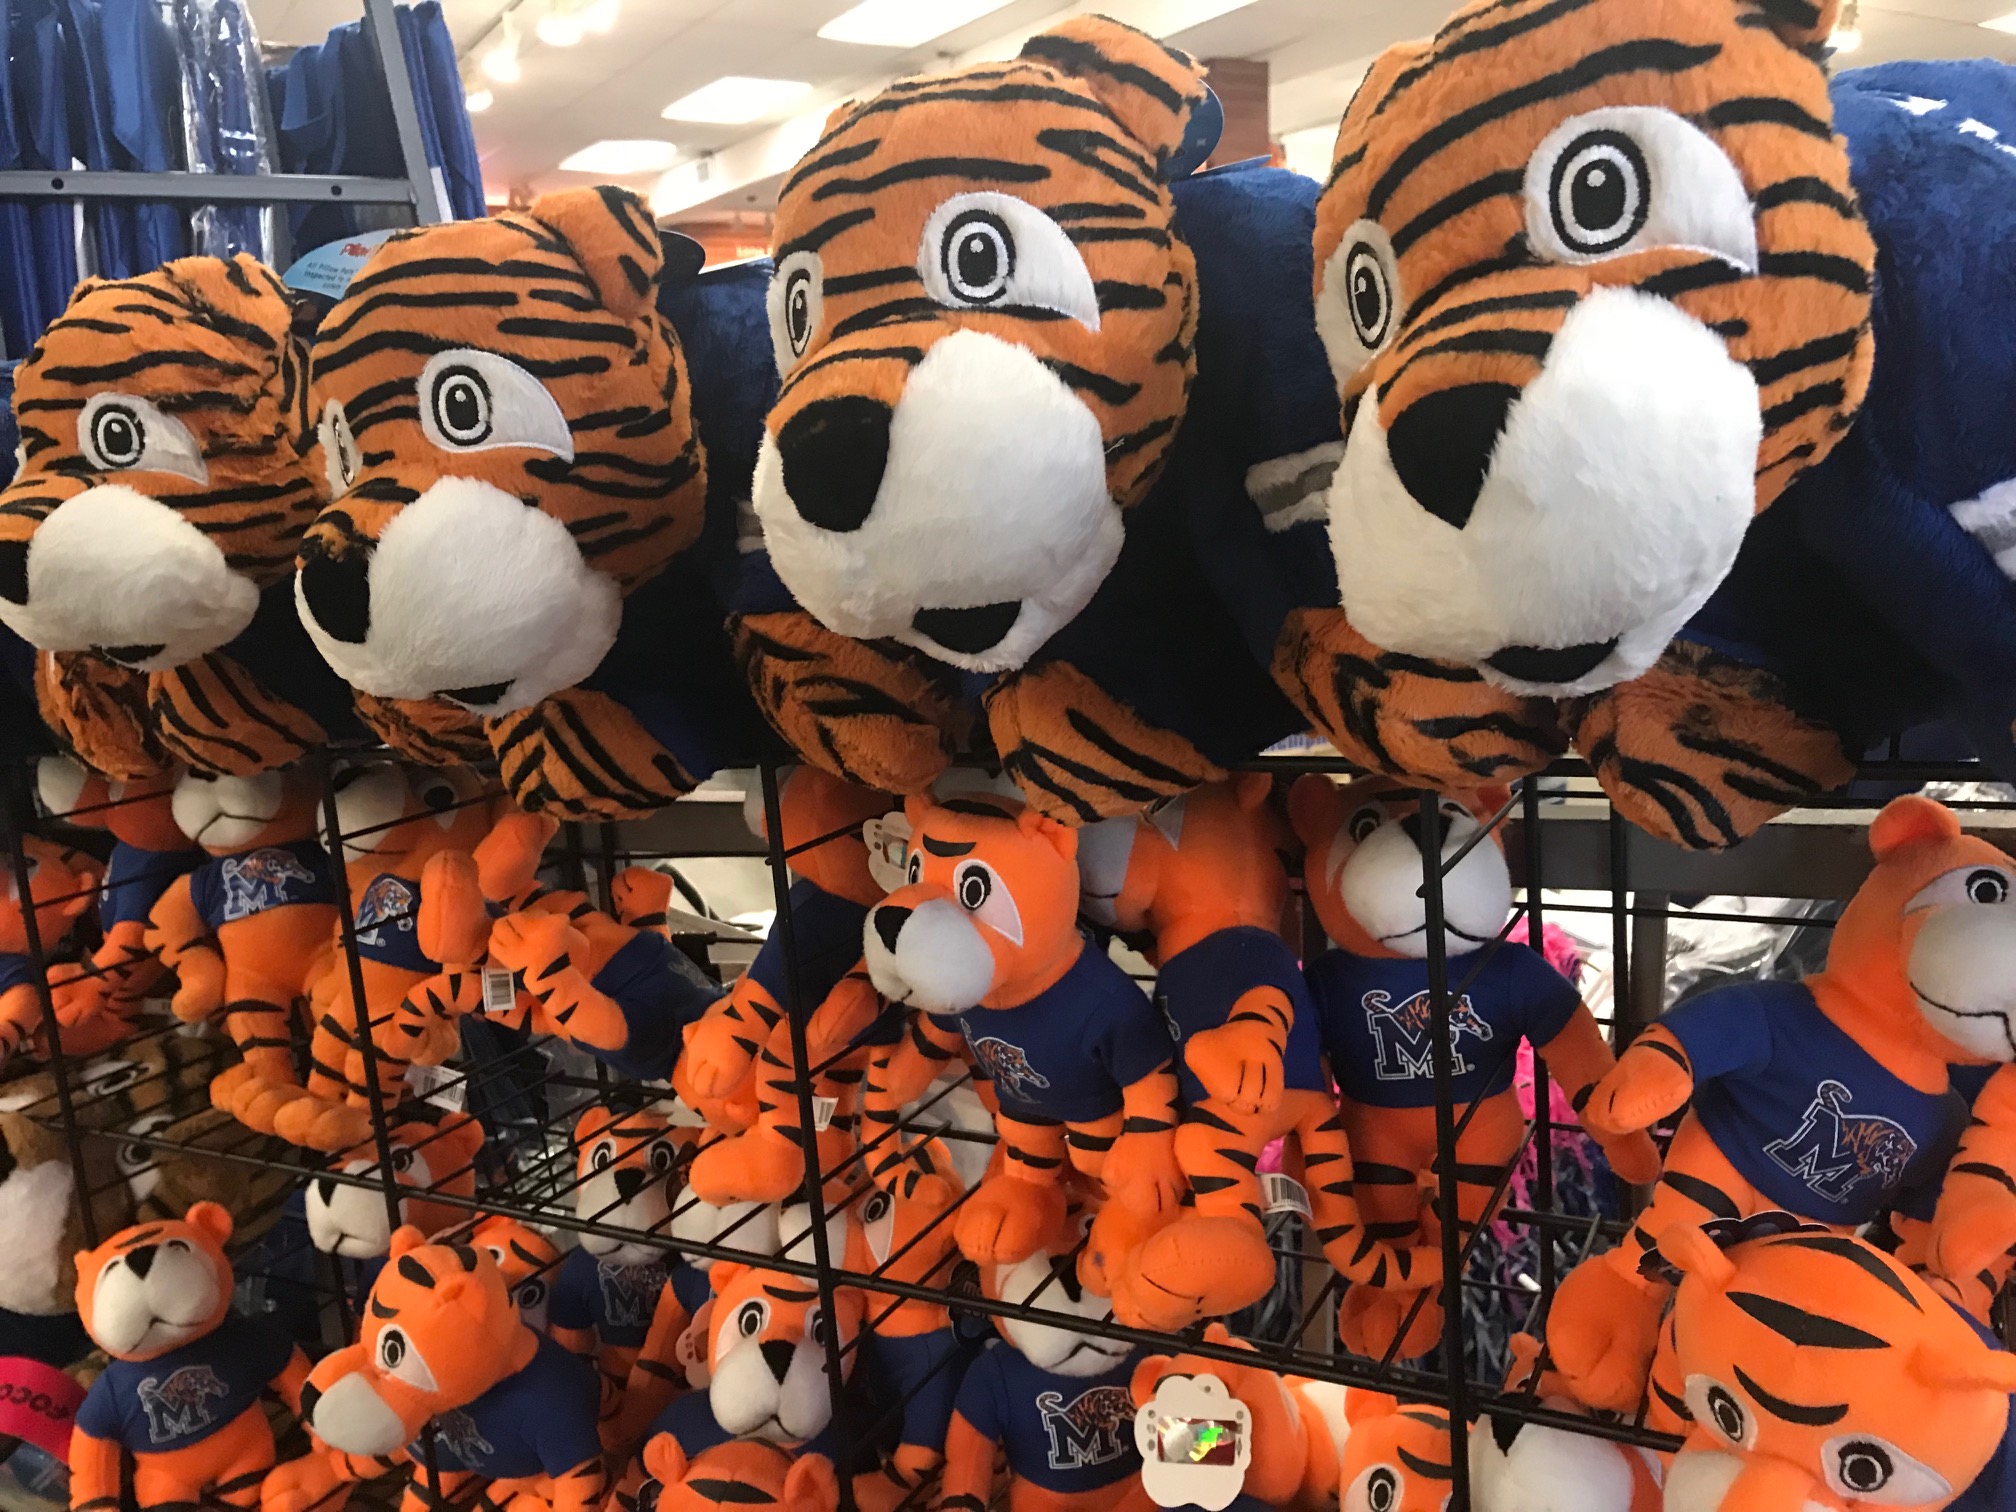 UofM Partners With Memphis Zoo To House New Live Tiger Mascot